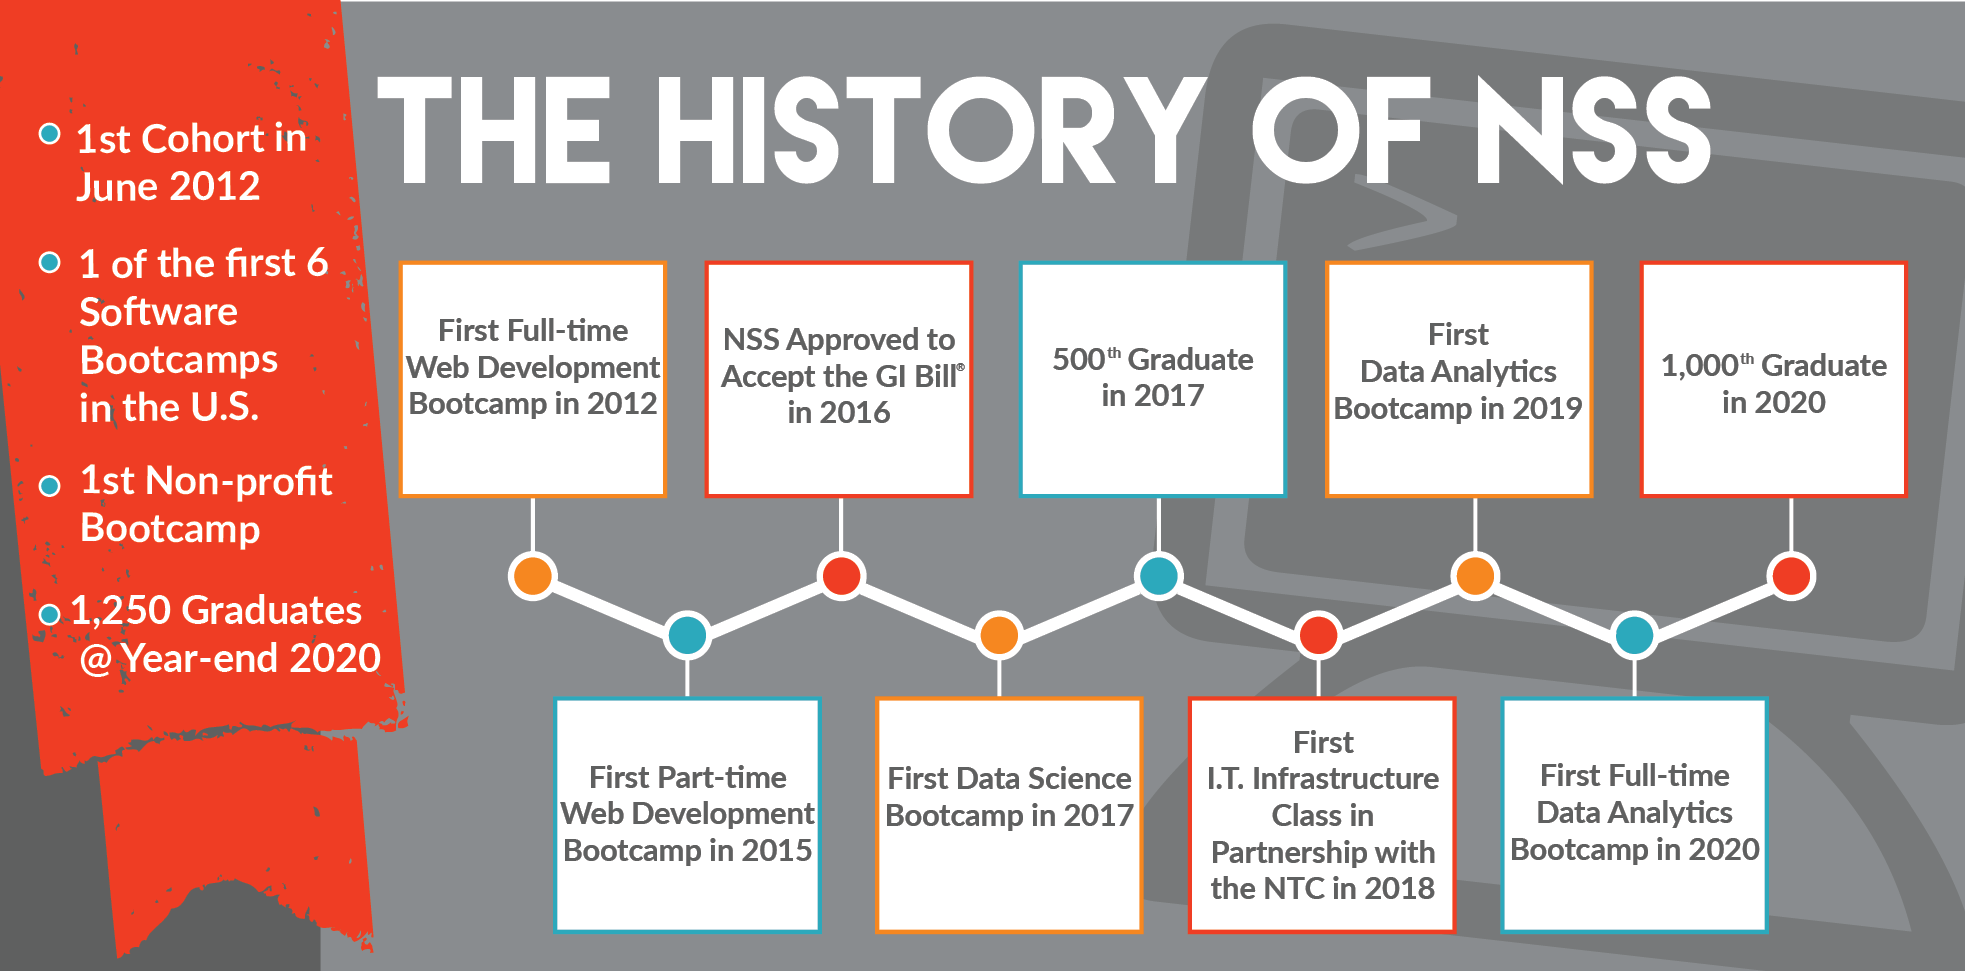 The History of NSS - a back at 8 years of milestones